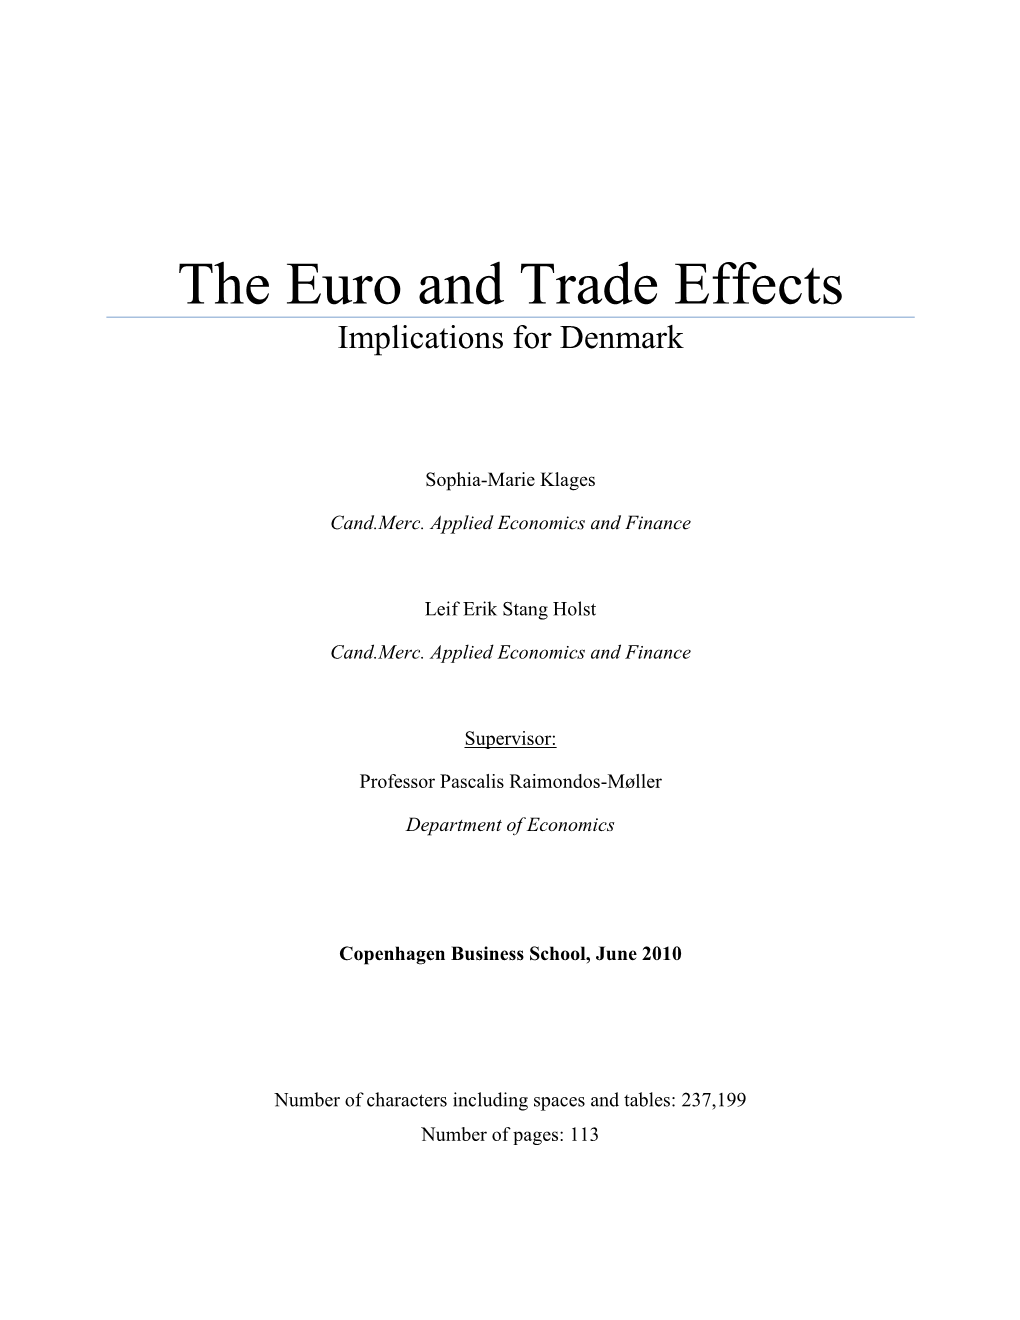 The Euro and Trade Effects Implications for Denmark